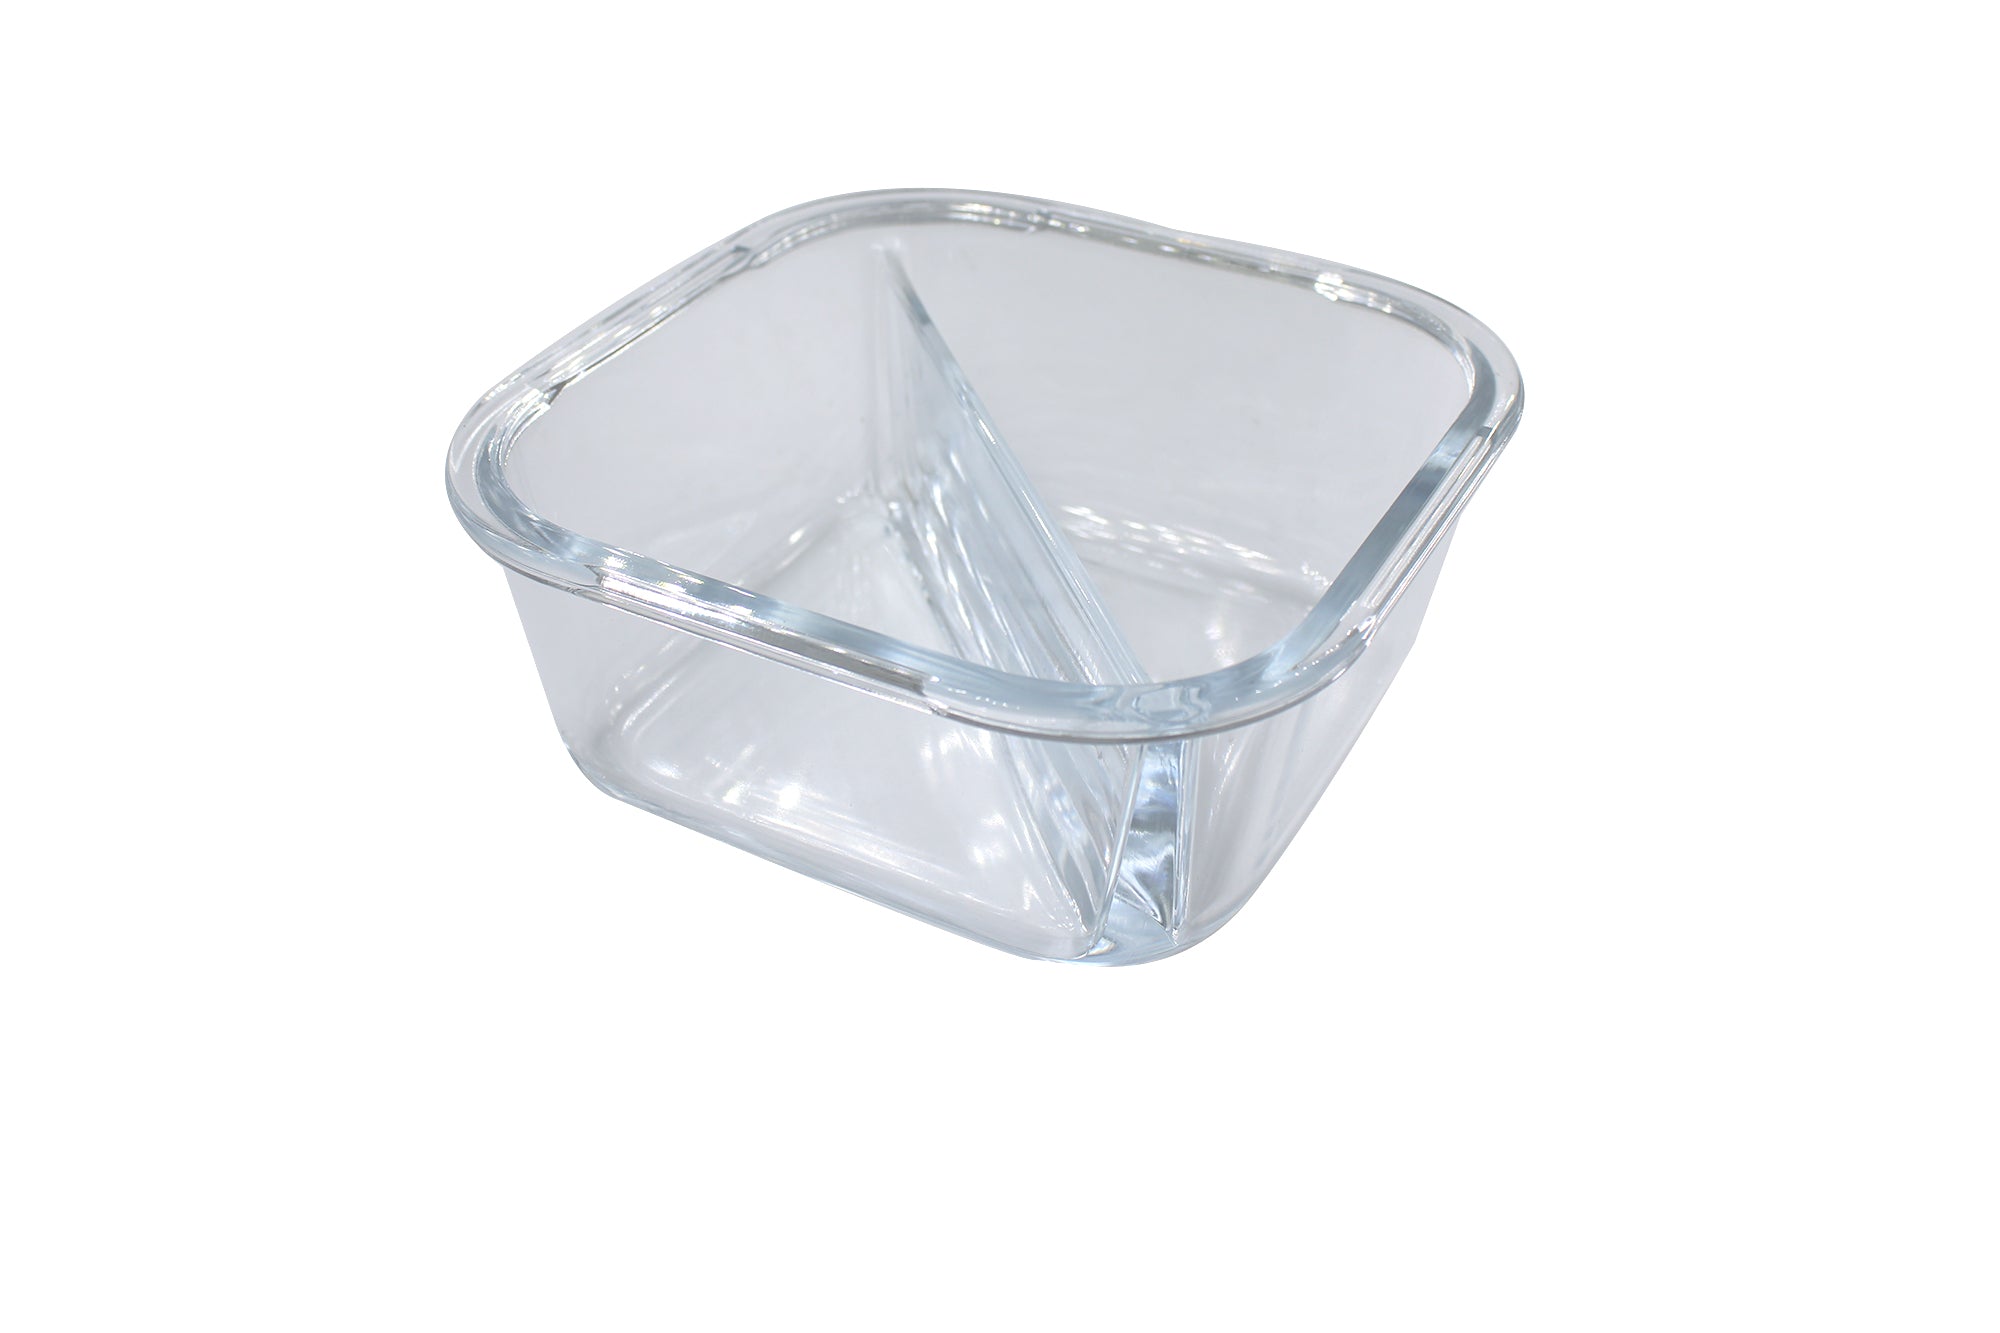 2 Oven-Safe Partitioned Glass Containers with Steam Vent Lids - 800ml